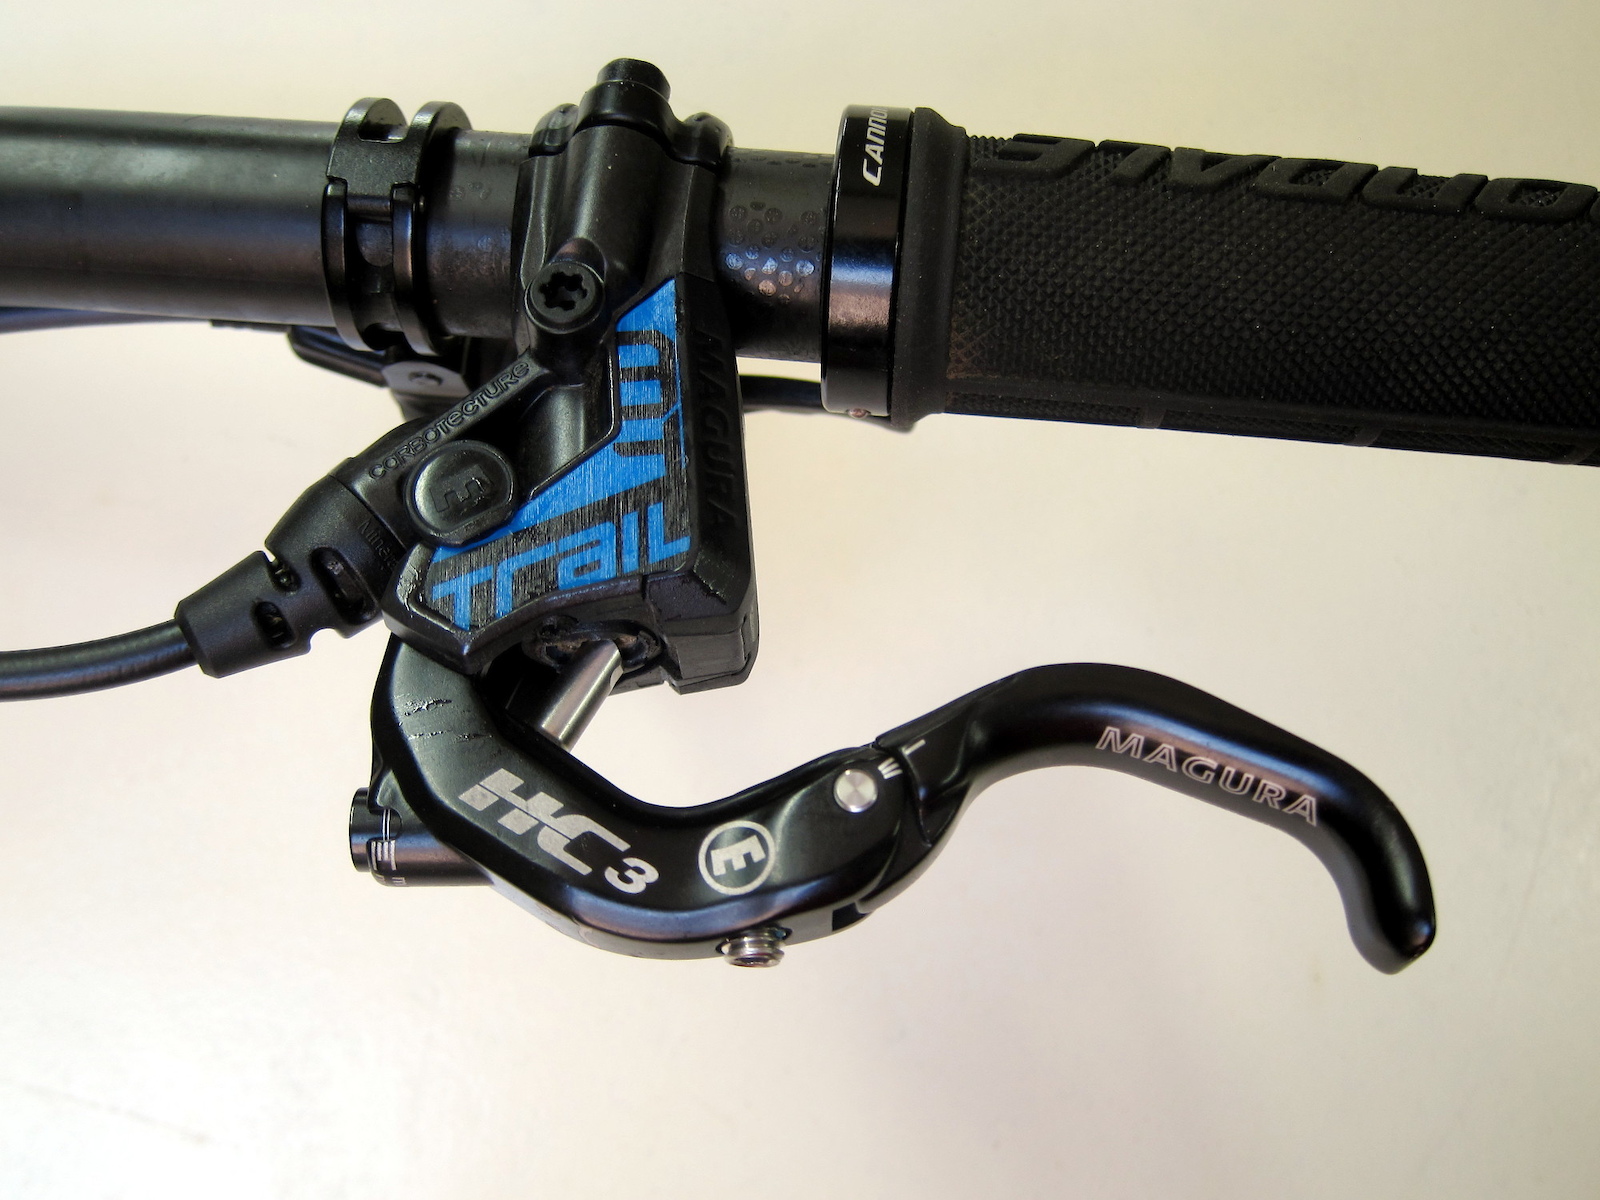 Magura MT5 with HC Levers Left / Right